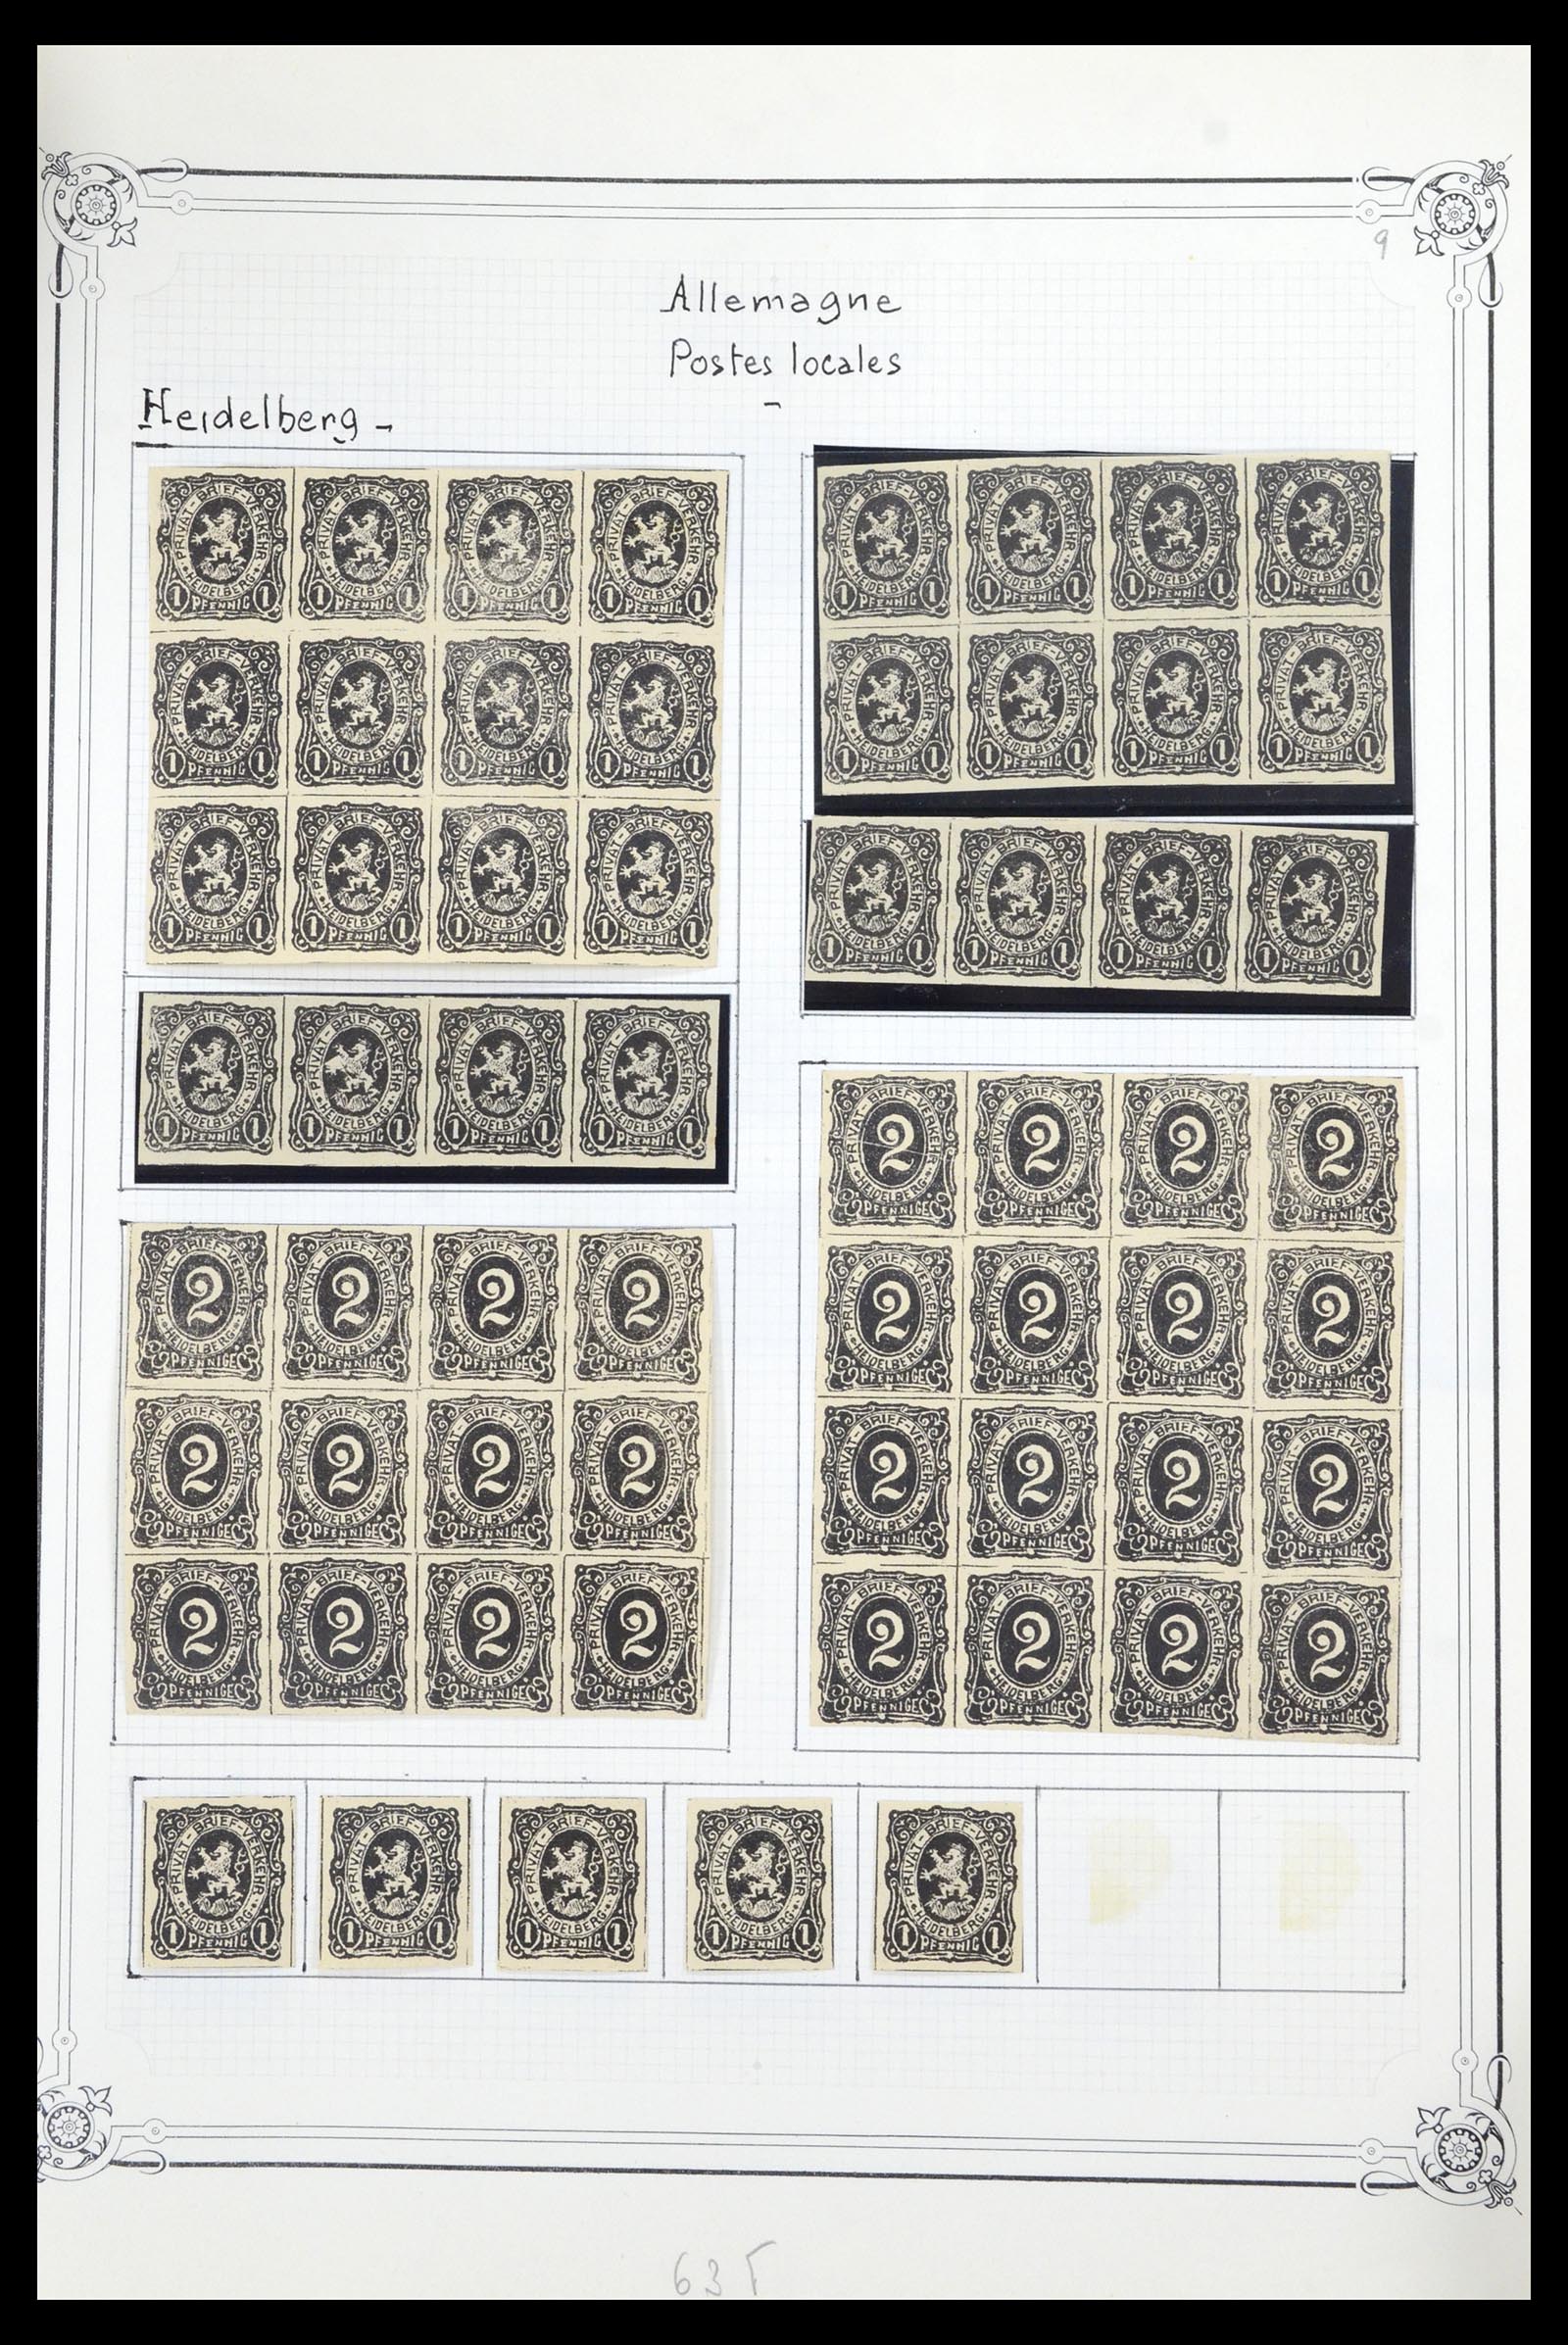 36972 009 - Stamp collection 36972 Germany local post 1880-1900.